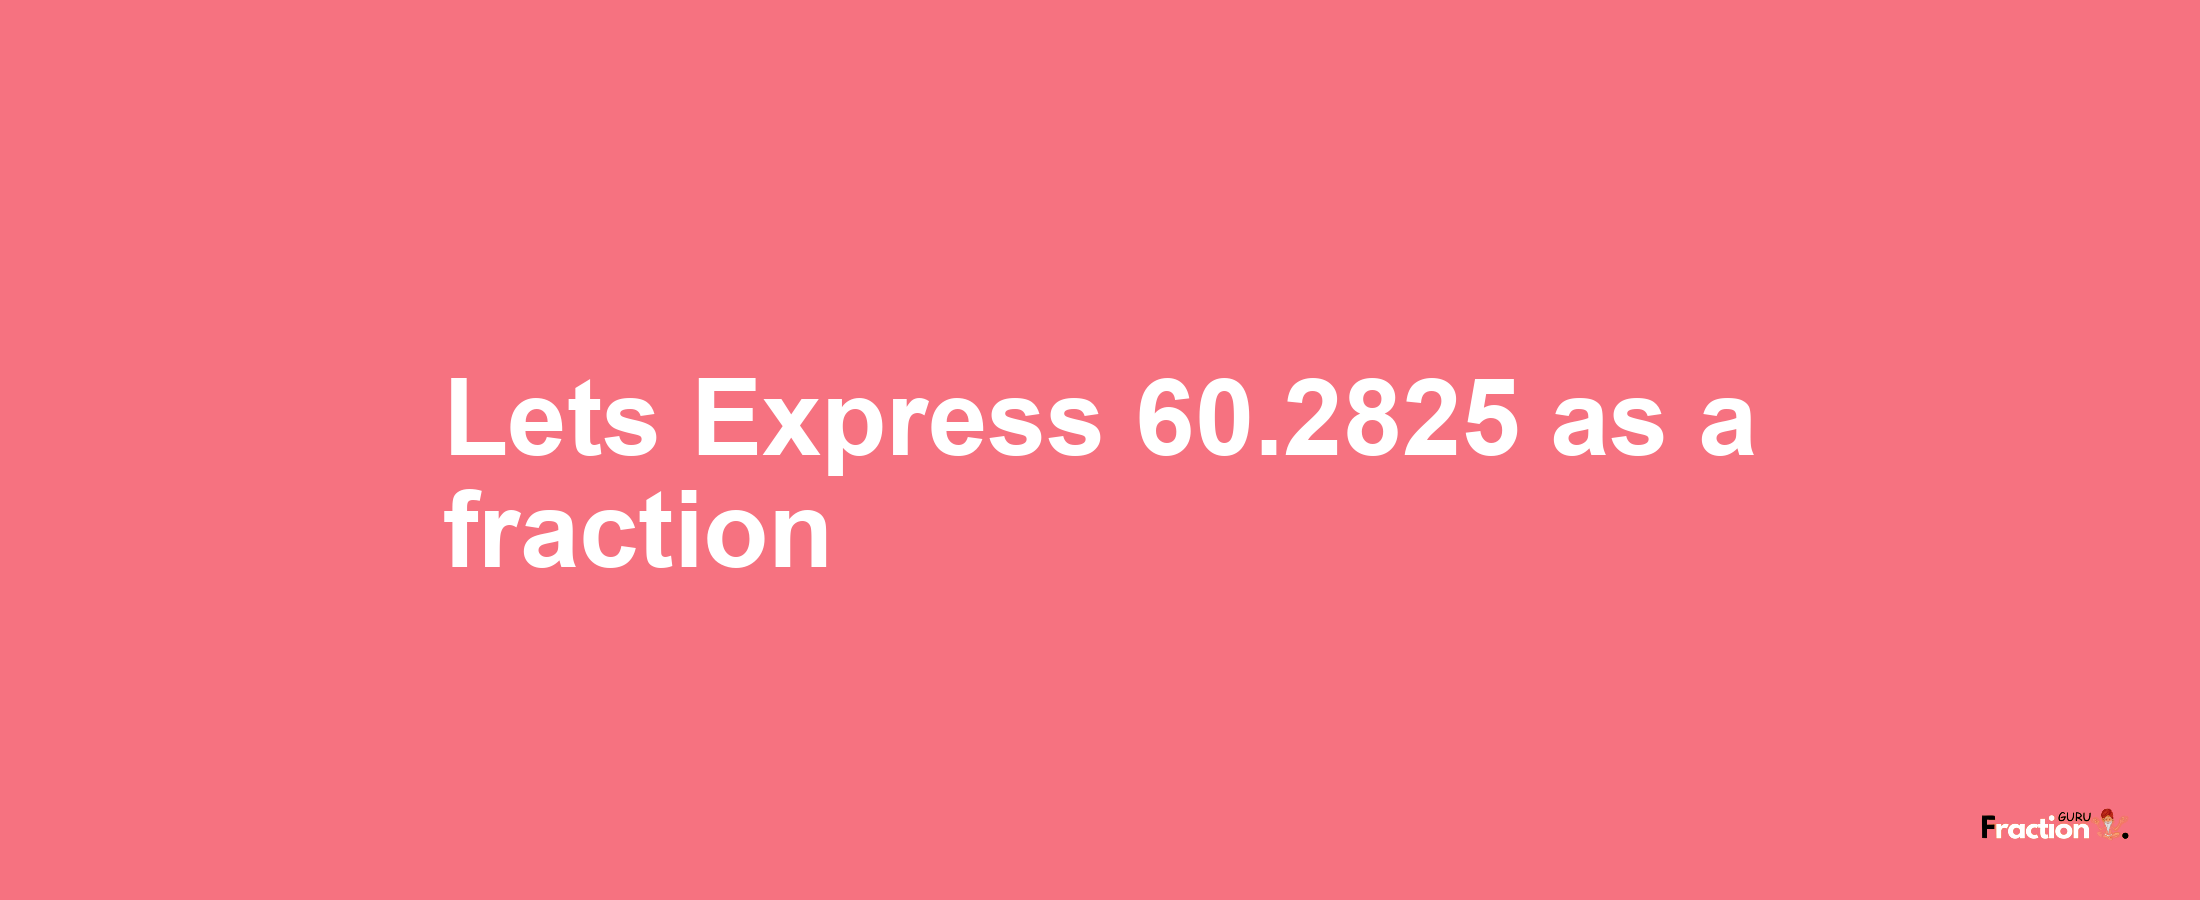 Lets Express 60.2825 as afraction